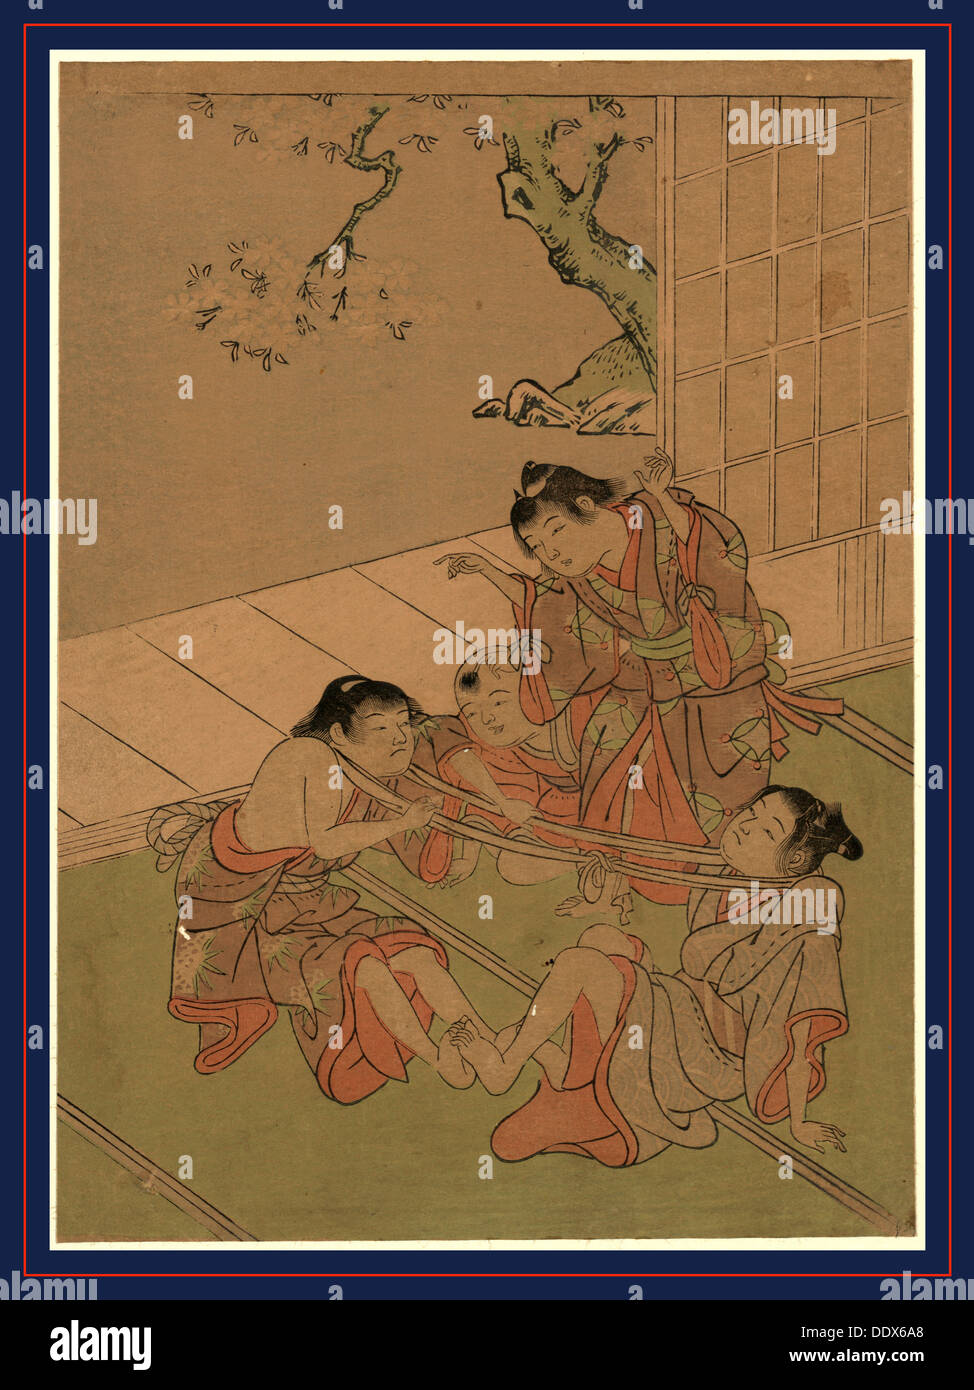 Kubihiki, Neck tug of war. [between 1770 and 1773], 1 print : woodcut, color ; 26.6 x 19.3 cm., Print shows two boys watching Stock Photo